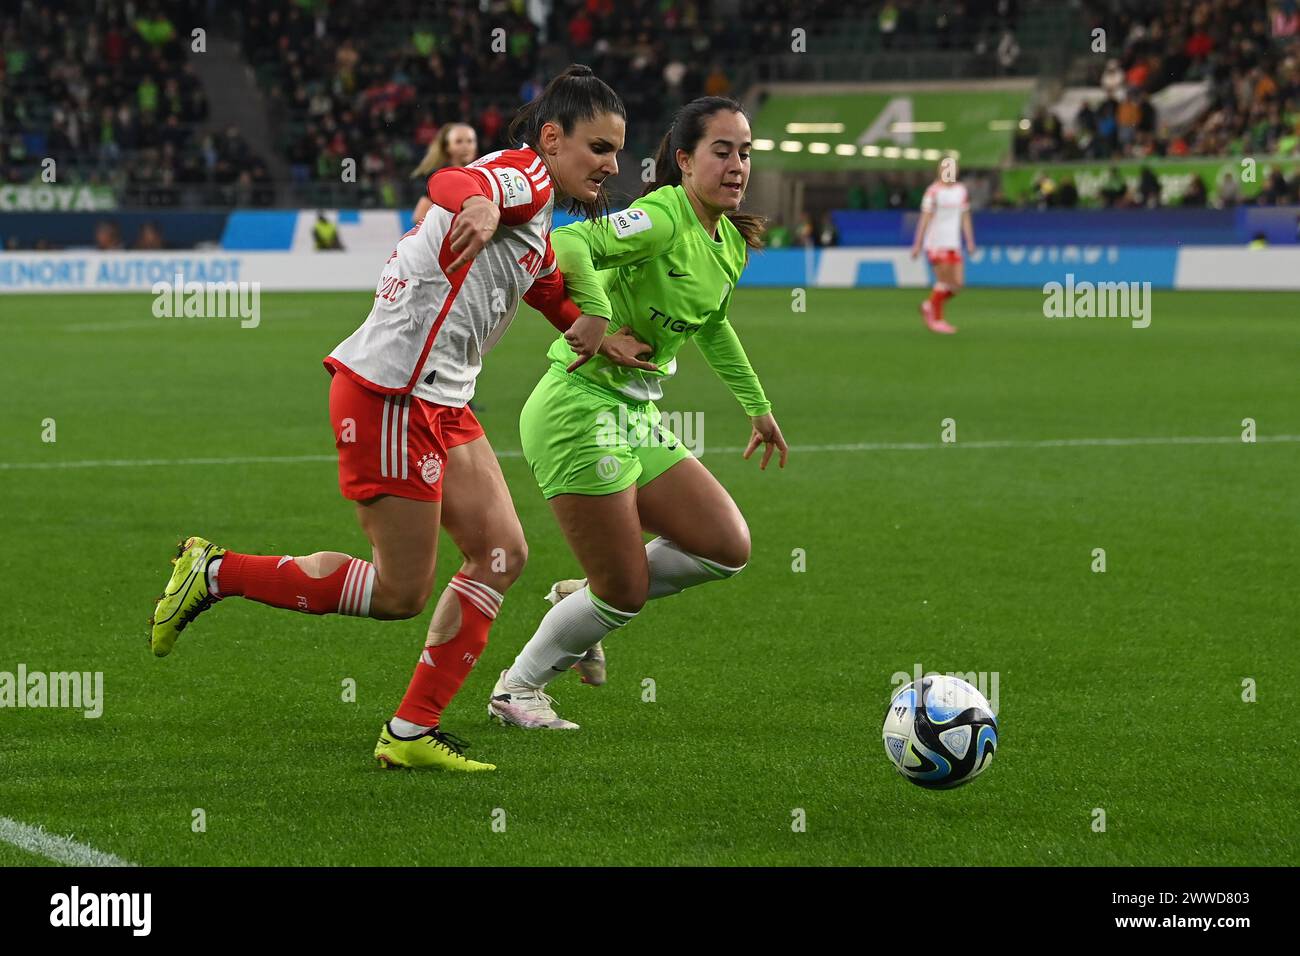 Wolfsburg, Germany. 23rd Mar, 2024. Soccer, Women: Bundesliga, VfL Wolfsburg - Bayern Munich, matchday 17, Volkswagen Arena. Munich's Jovana Damnjanovi· (l) and Wolfsburg's Nuria Rabano Blanco fight for the ball. Credit: Swen Pförtner/dpa - IMPORTANT NOTE: In accordance with the regulations of the DFL German Football League and the DFB German Football Association, it is prohibited to utilize or have utilized photographs taken in the stadium and/or of the match in the form of sequential images and/or video-like photo series./dpa/Alamy Live News Stock Photo